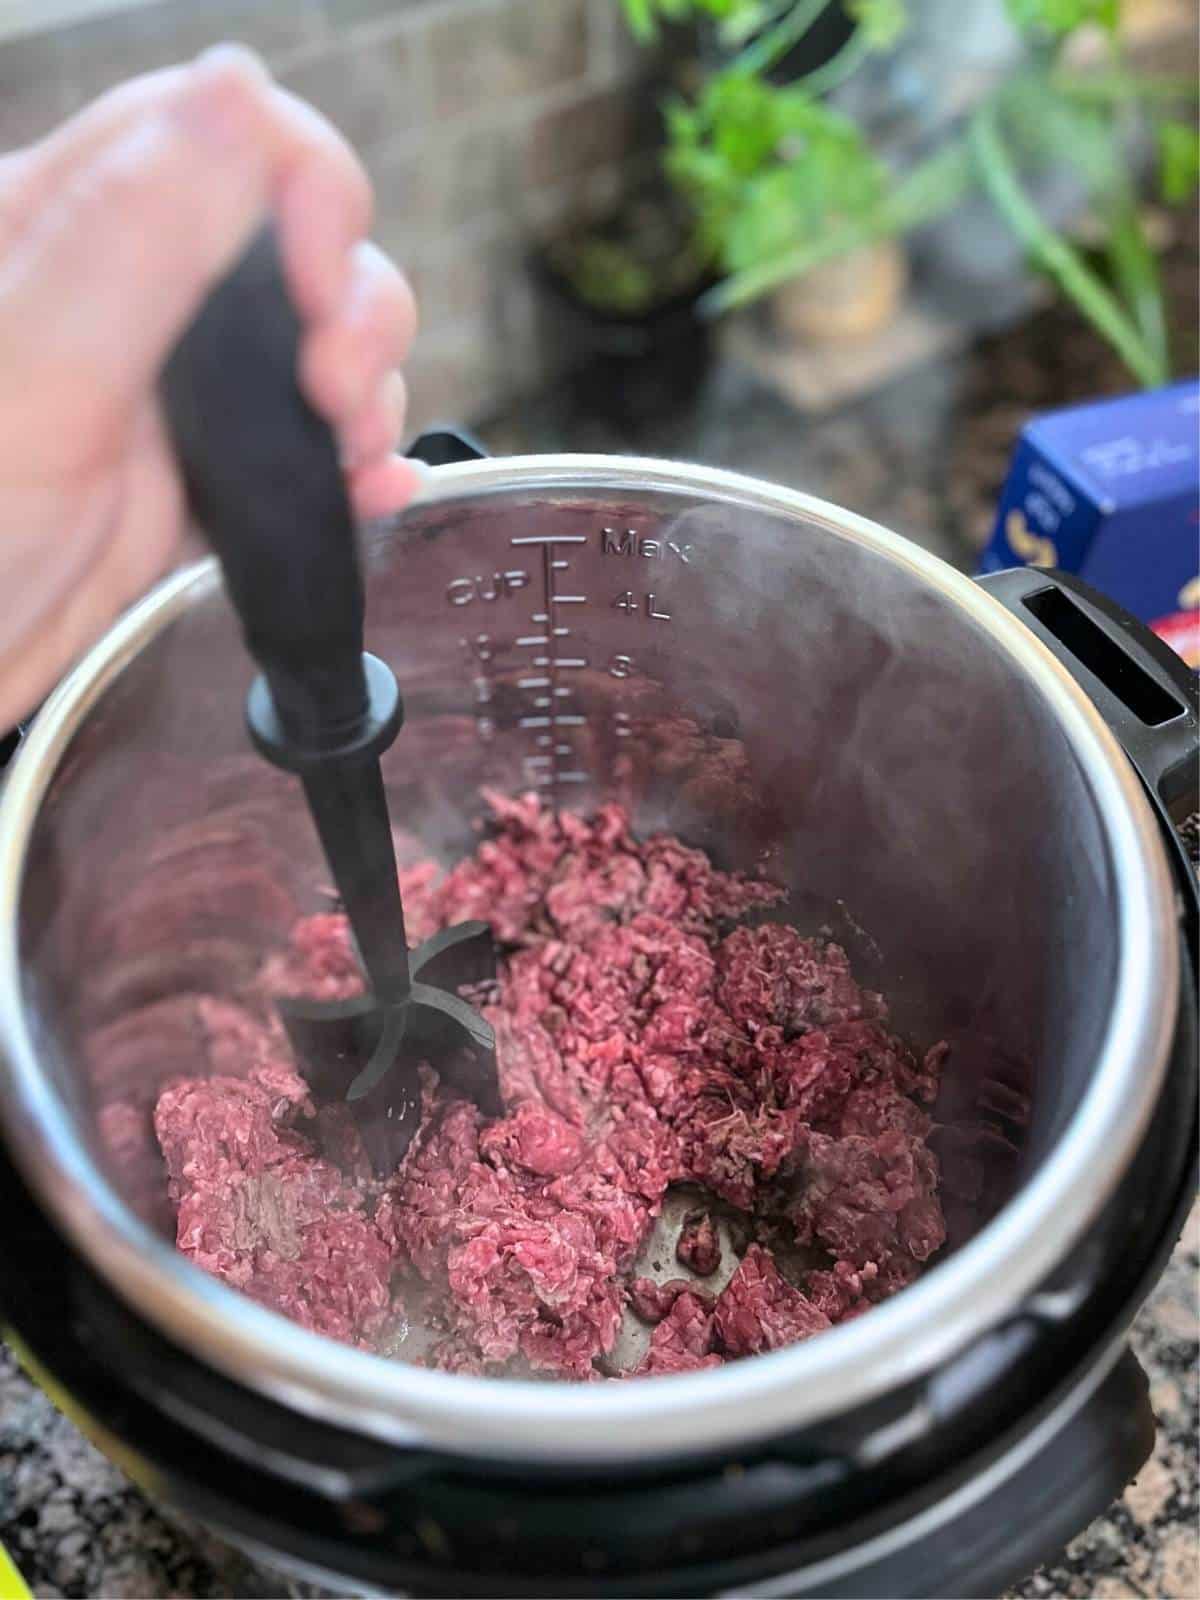 Ground beef being cooked in the instant pot. There is a hand using a utensil to break up beef.